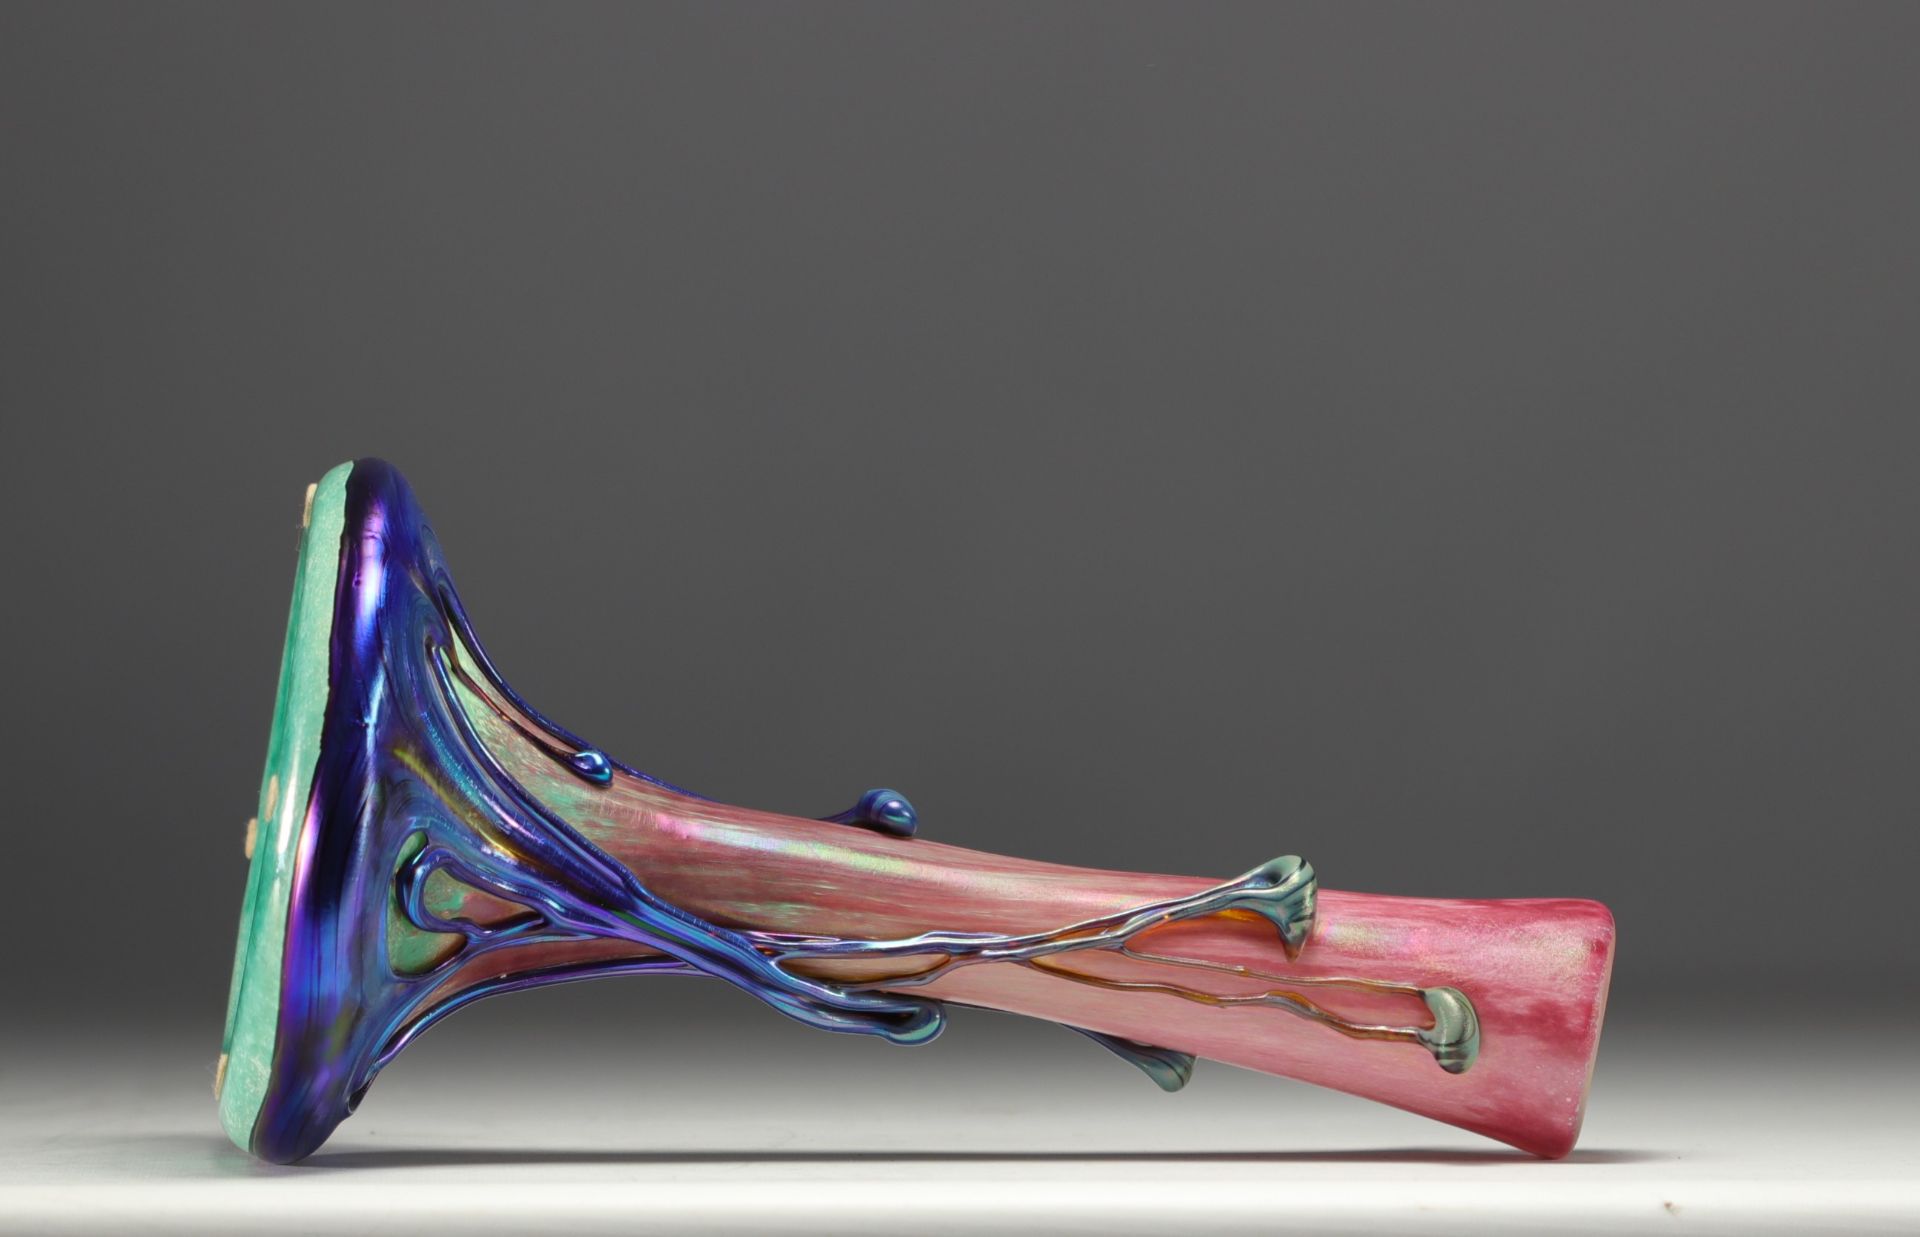 Michele LUZORO (1949 - ) Novaro workshop - Blown glass vase in shades of pink, blue and green. - Image 4 of 4